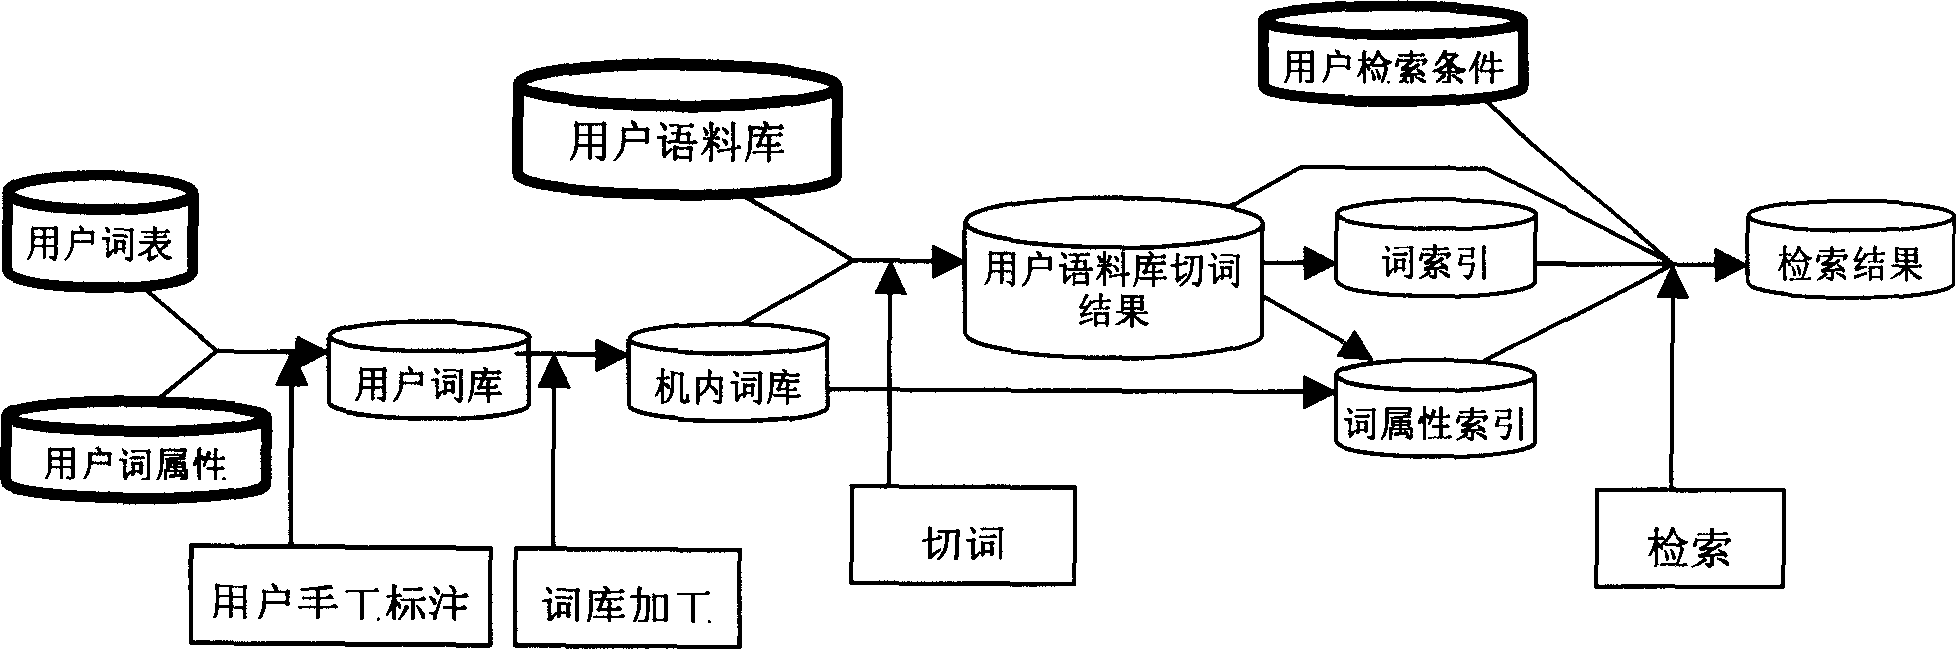 Method for automatic indexing and searching word and word attributes in Chinese text